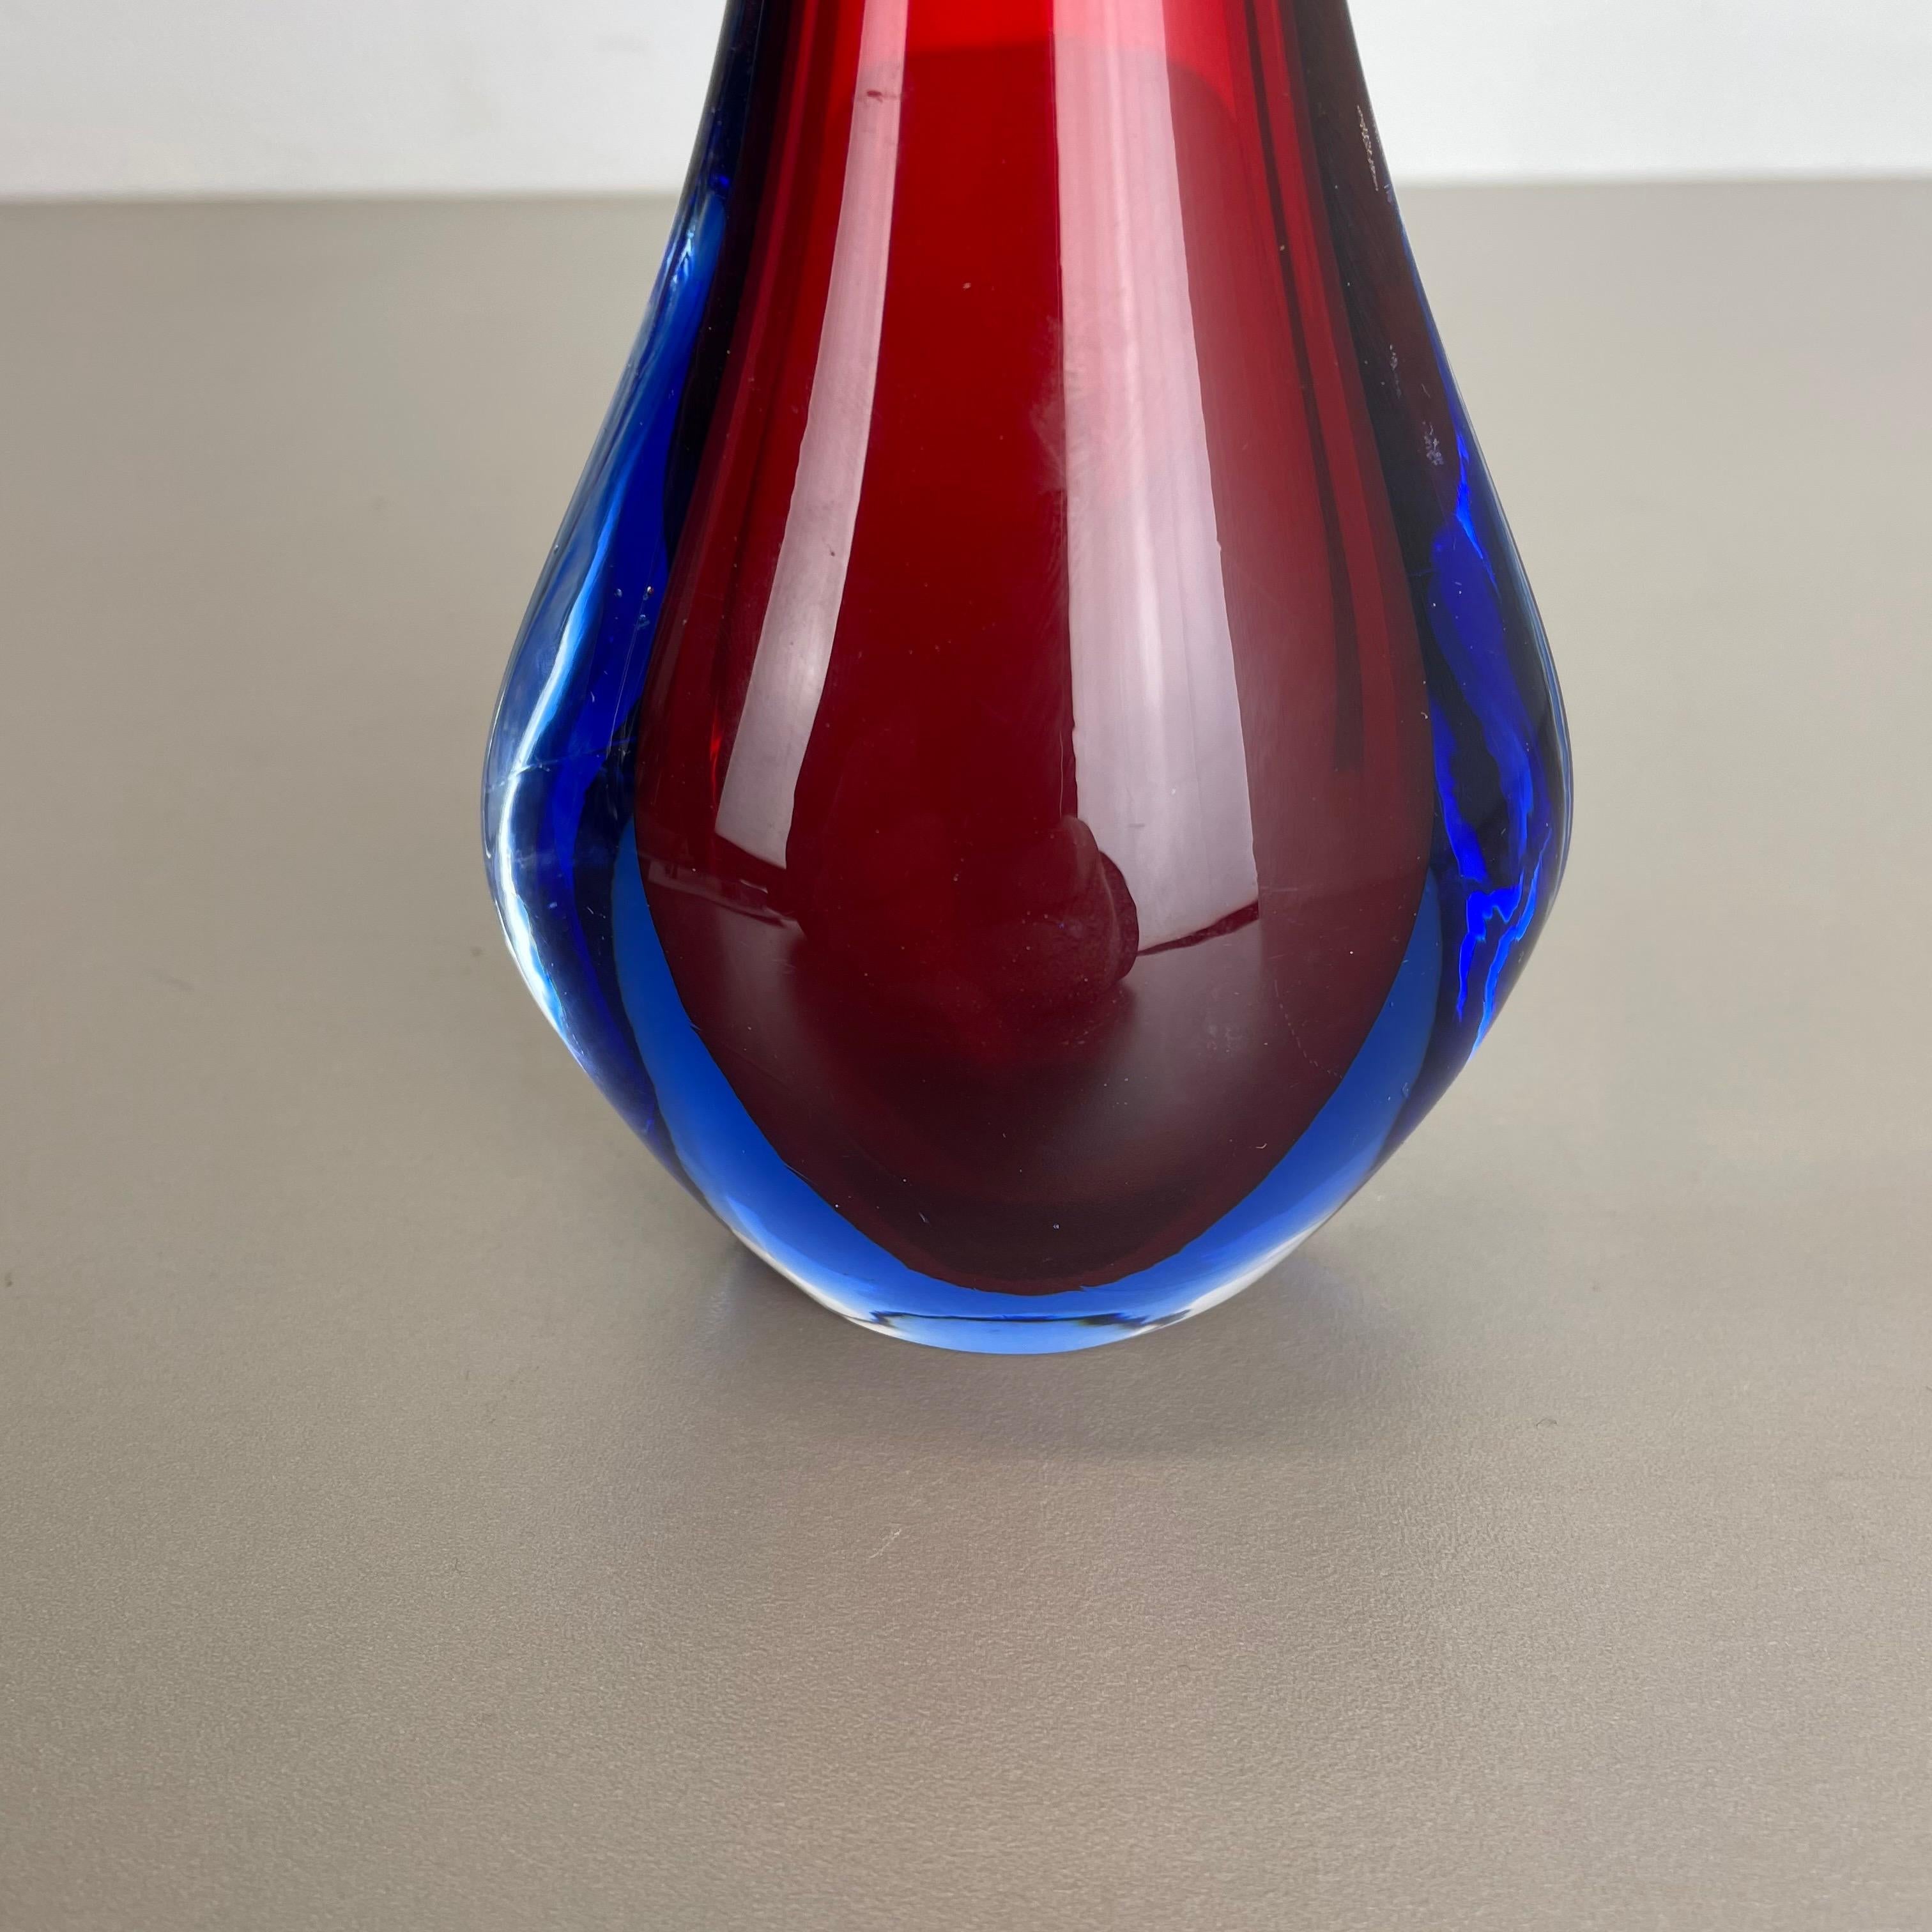 Large 1960s Murano Glass Sommerso 29cm Single-Stem Vase by Flavio Poli, Italy For Sale 1